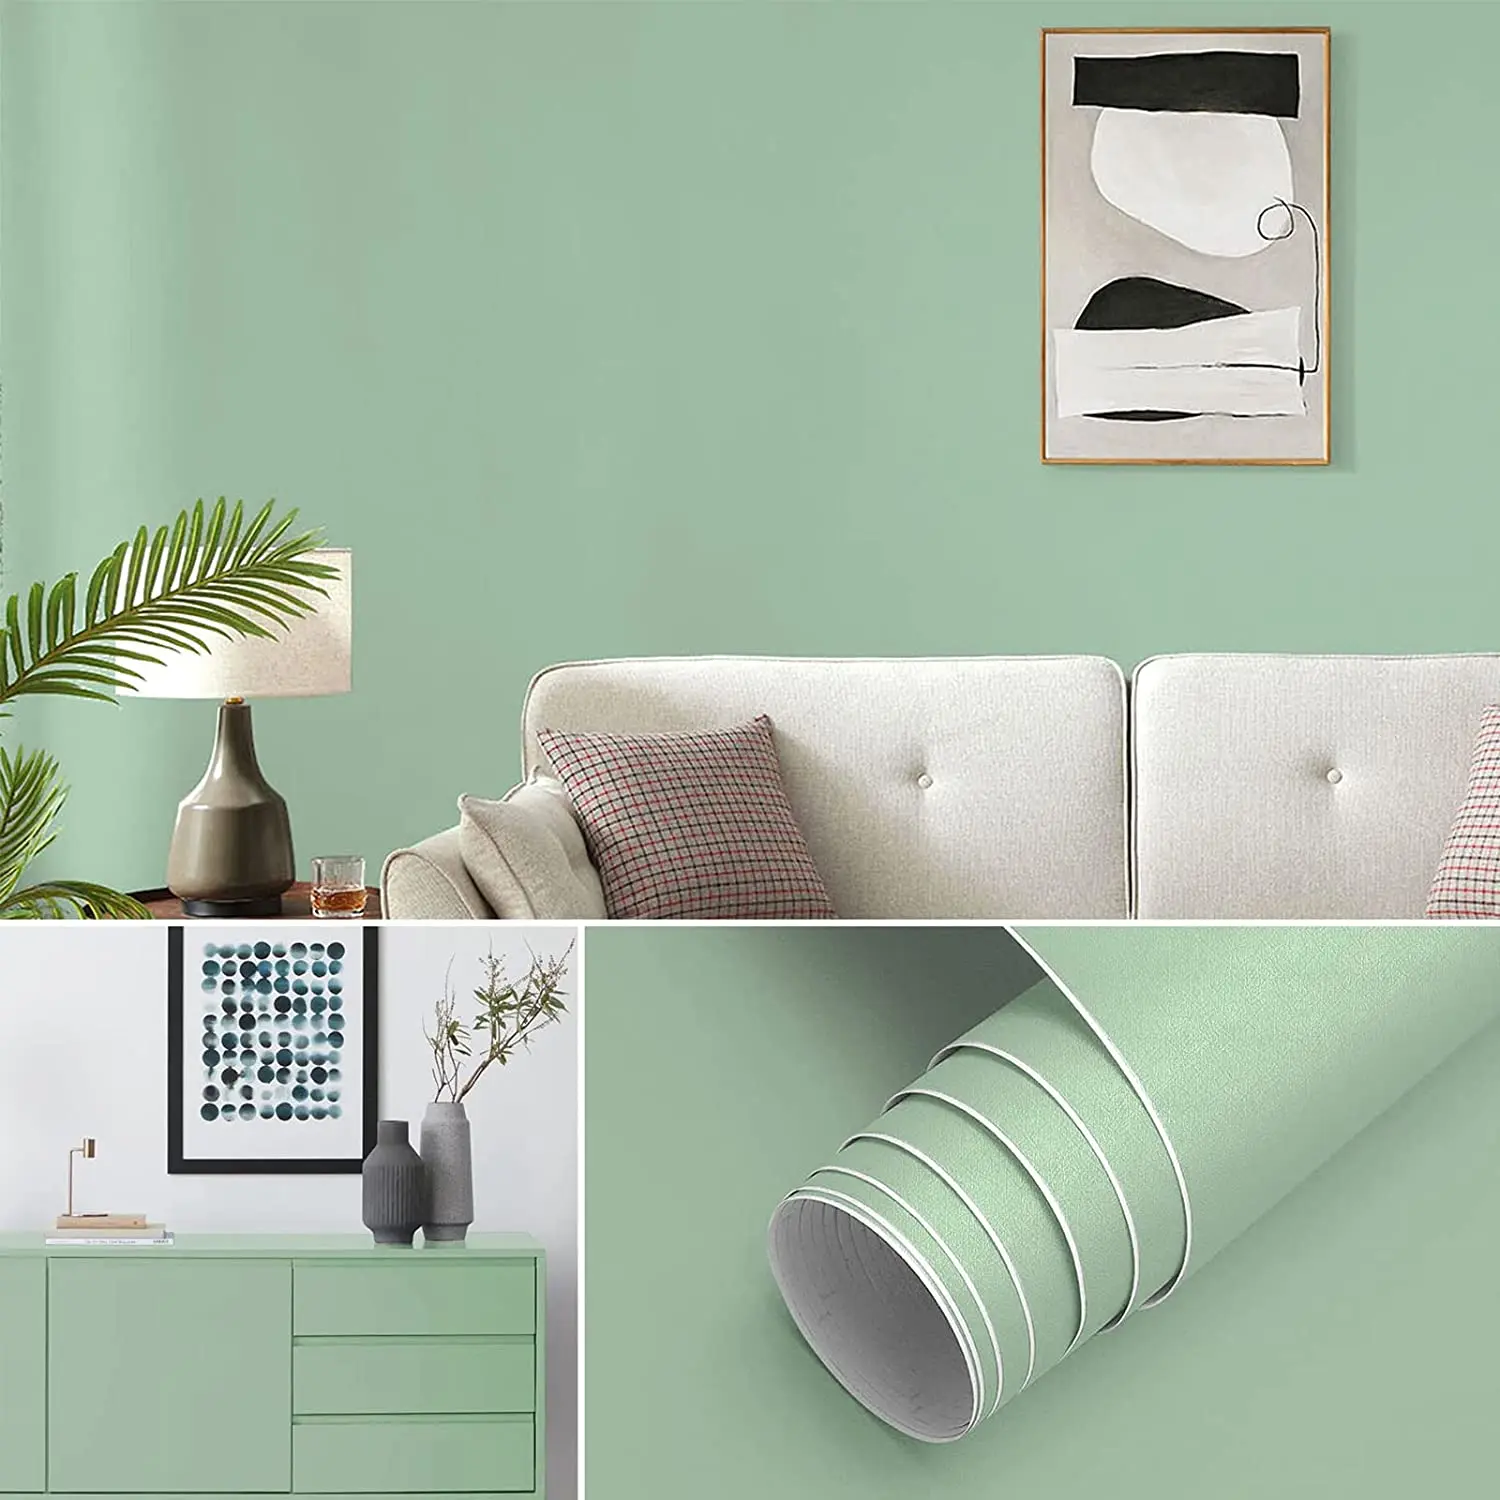 Waterproof Solid Color Bean Green Decor Wallpaper for Living Room Bedroom Walls Pvc Self Adhesive Removable Thick Stickers pvc macaron solid vinyl self adhesive wallpaper for walls in rolls livingroom decoration waterproof wallpaper for bedroom walls